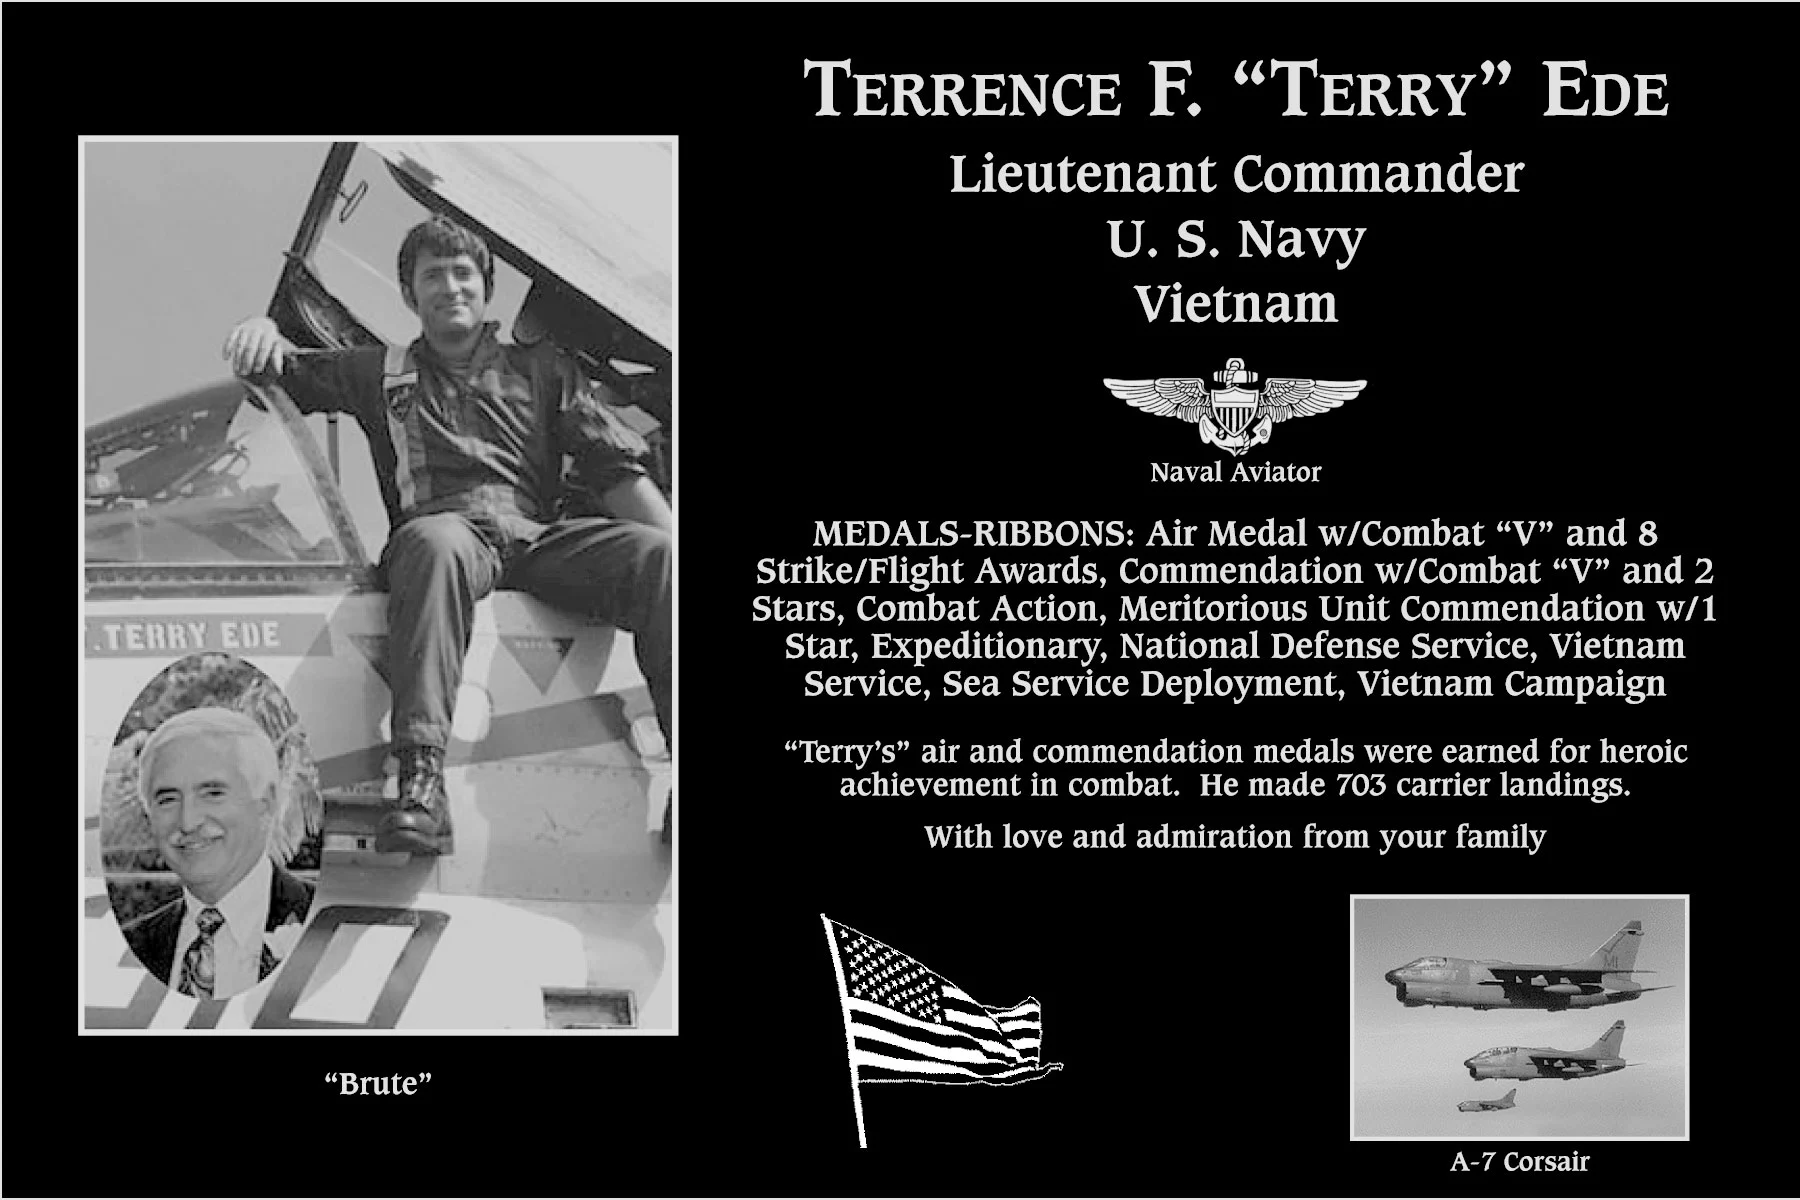 Terrence F “Terry” Ede